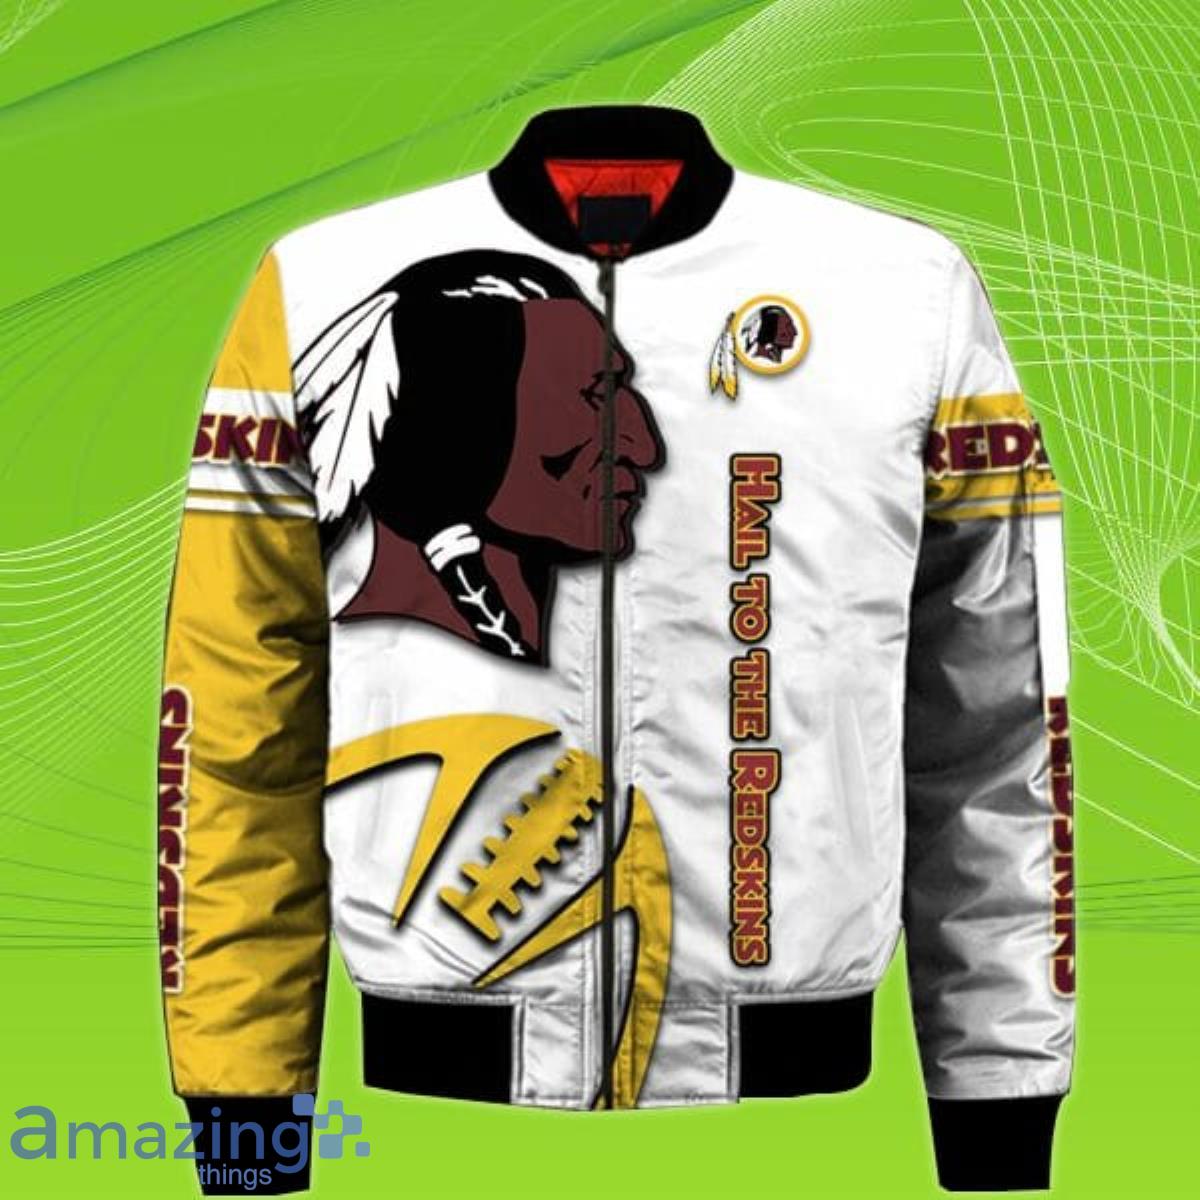 best redskins jersey to buy